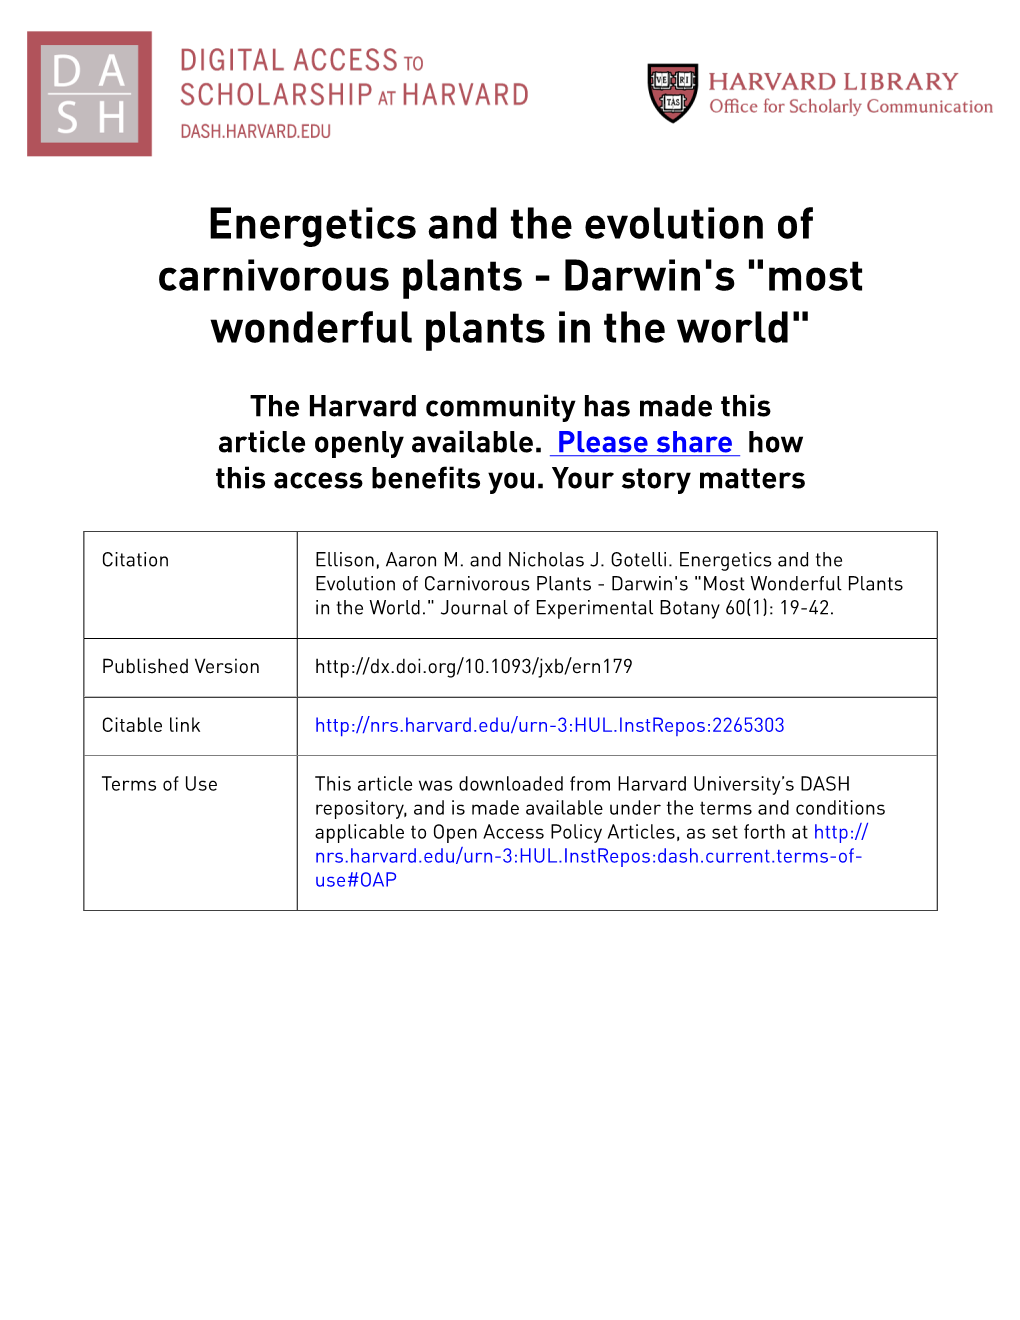 Energetics and the Evolution of Carnivorous Plants - Darwin's "Most Wonderful Plants in the World"